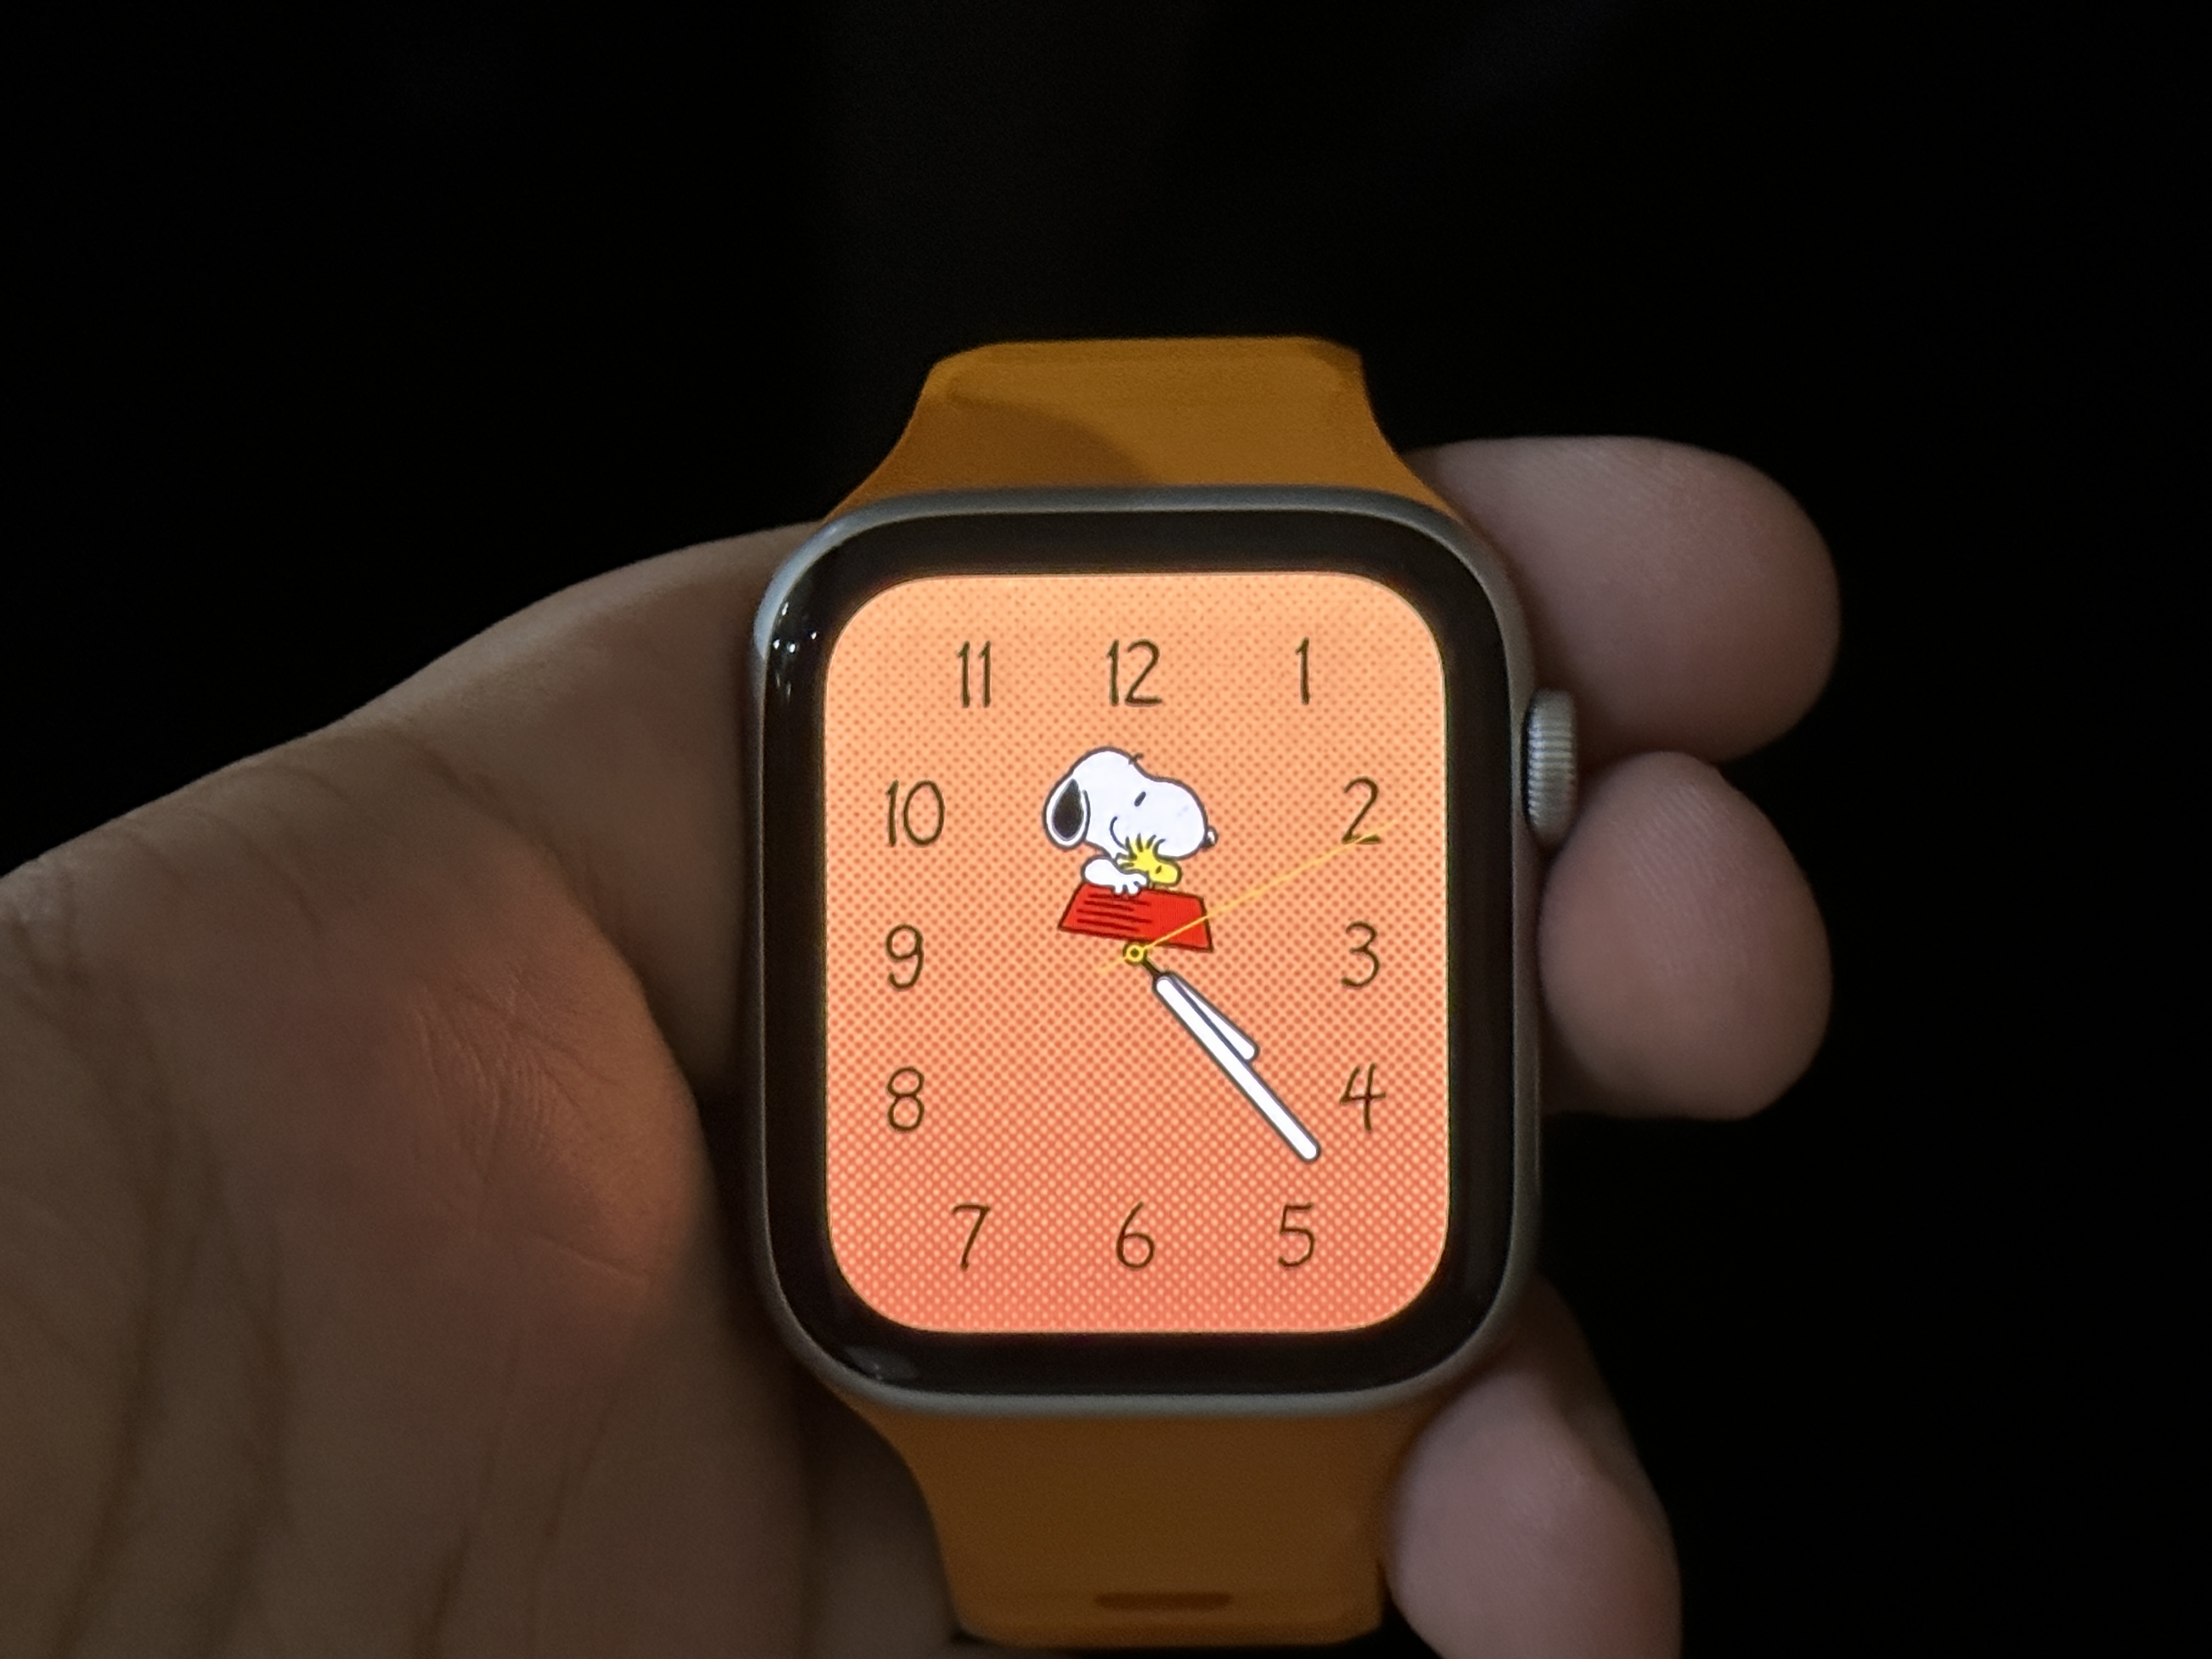 Snoopy Watch Face with Pumpkin background on Apple Watch SE.